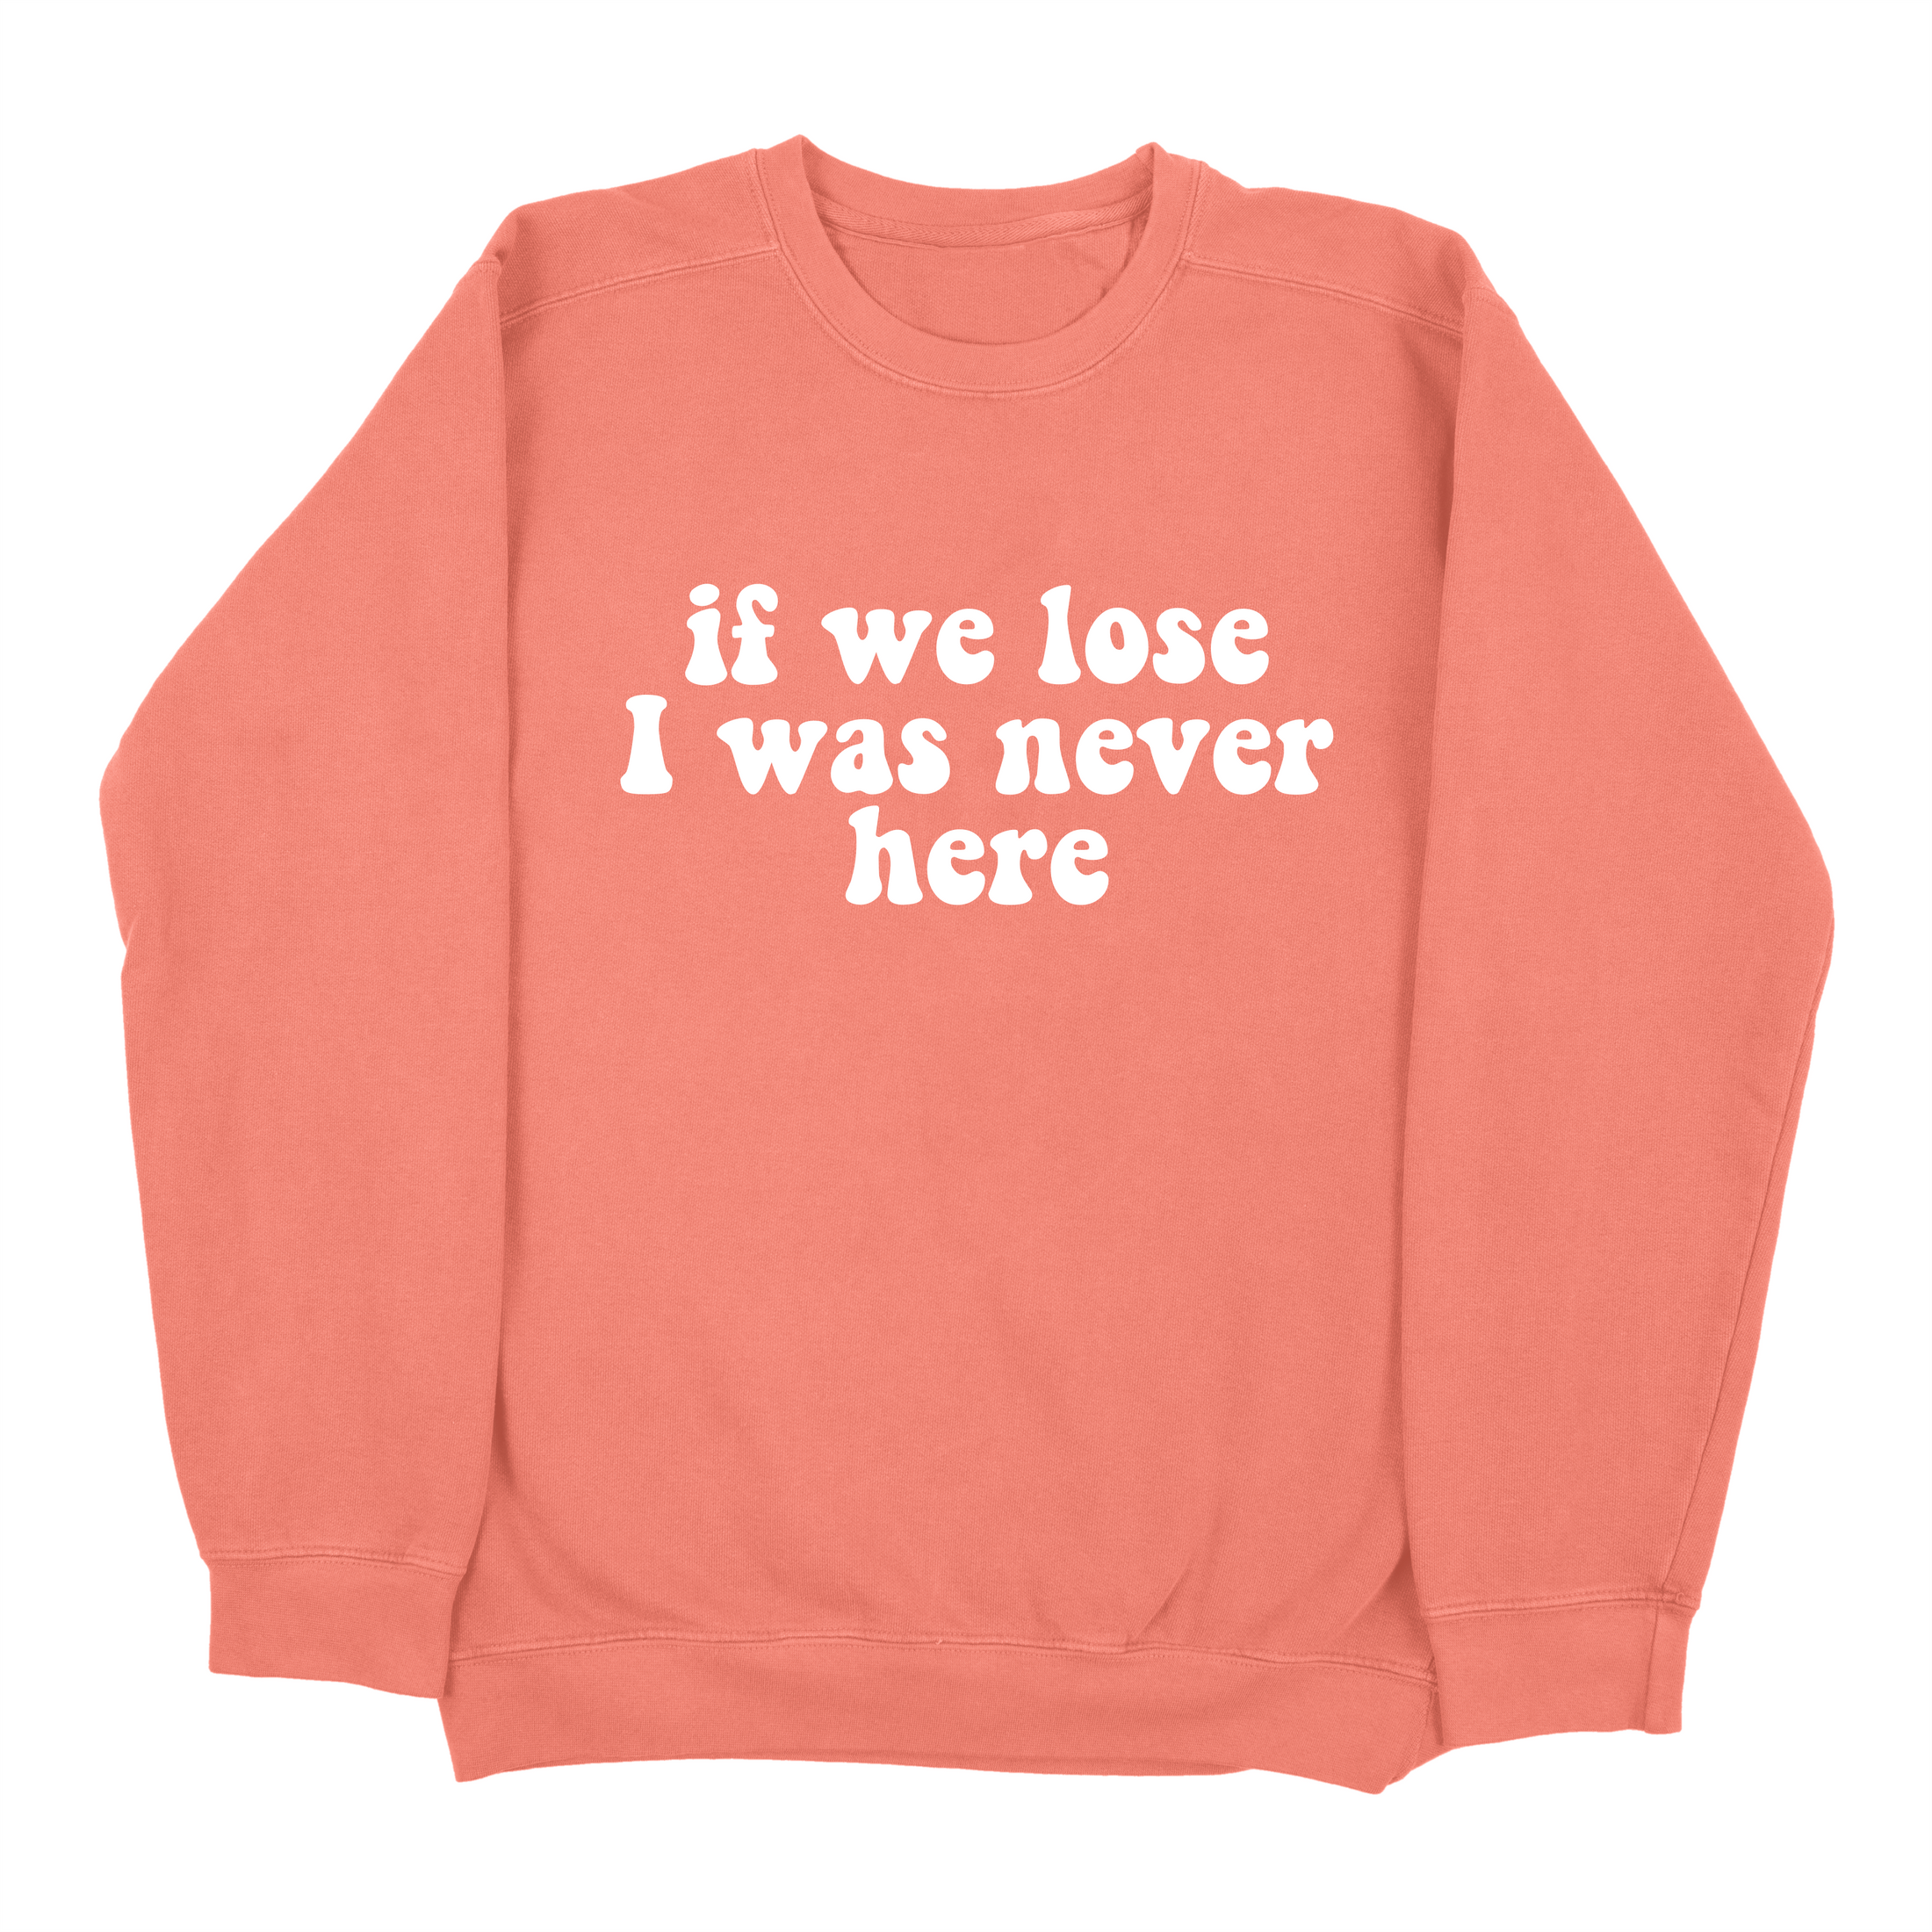 If We Lose I Was Never Here Sweatshirt (Pack of 6)